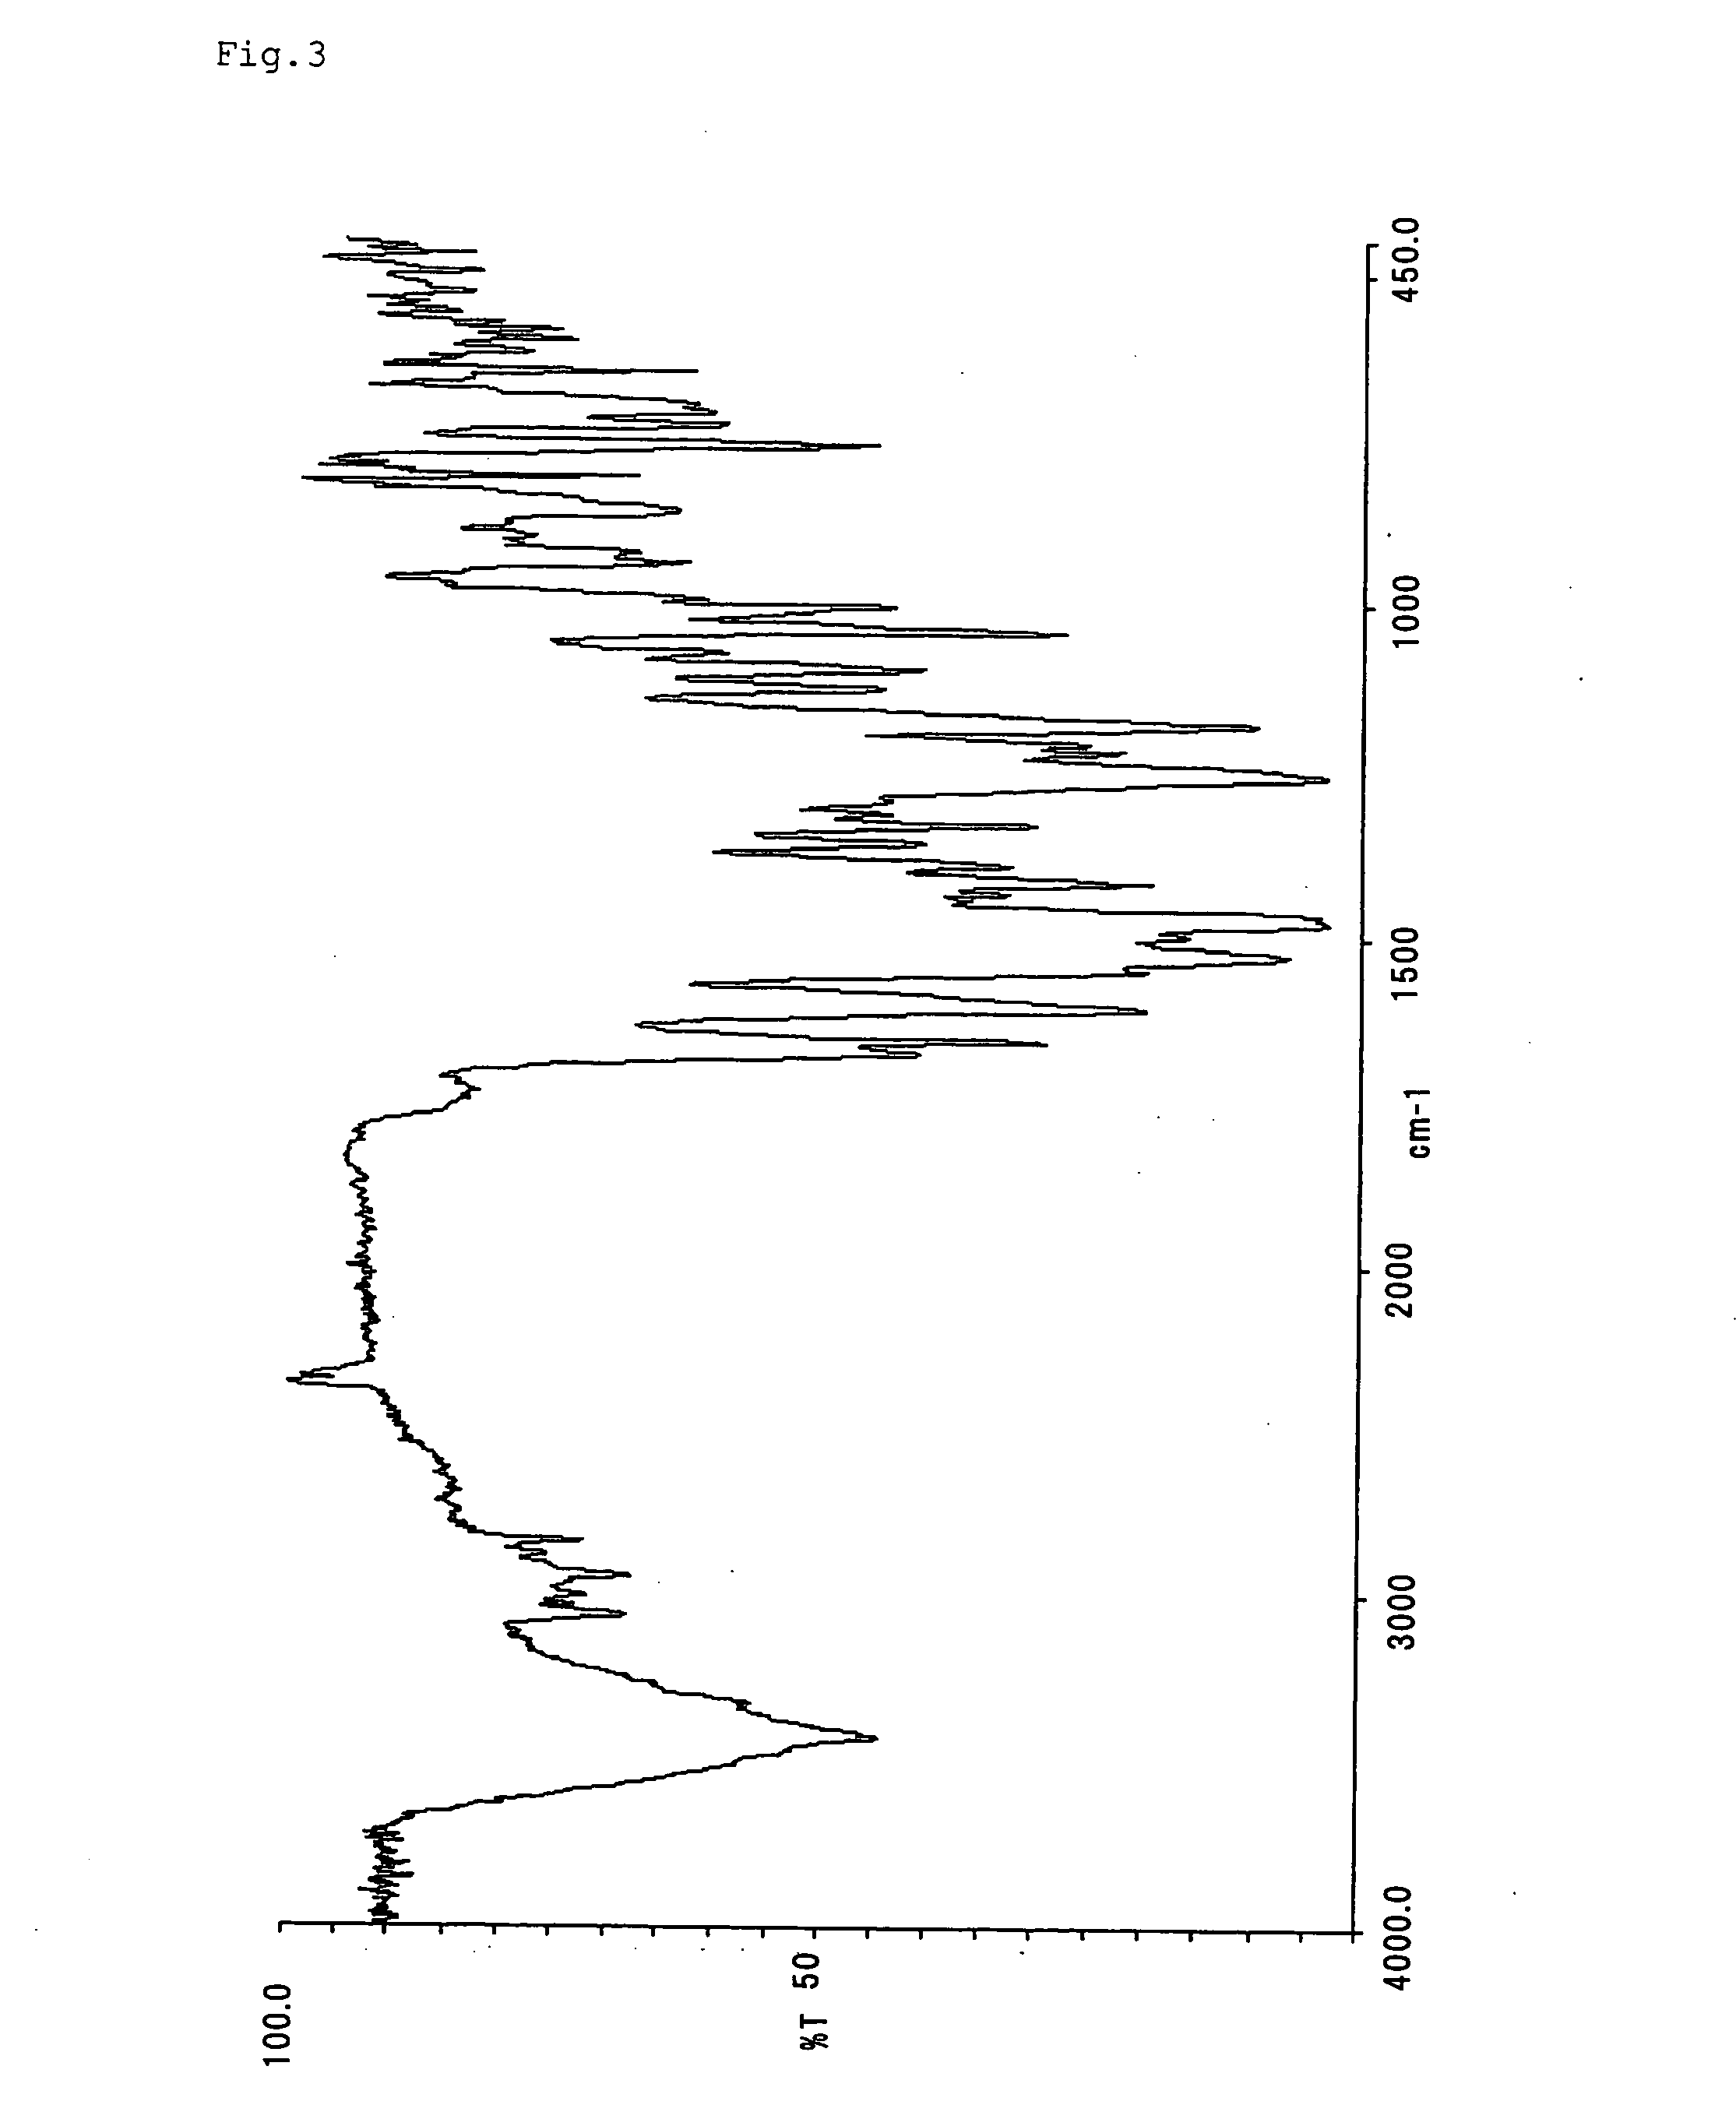 Monoazo compounds and process for preparing the same